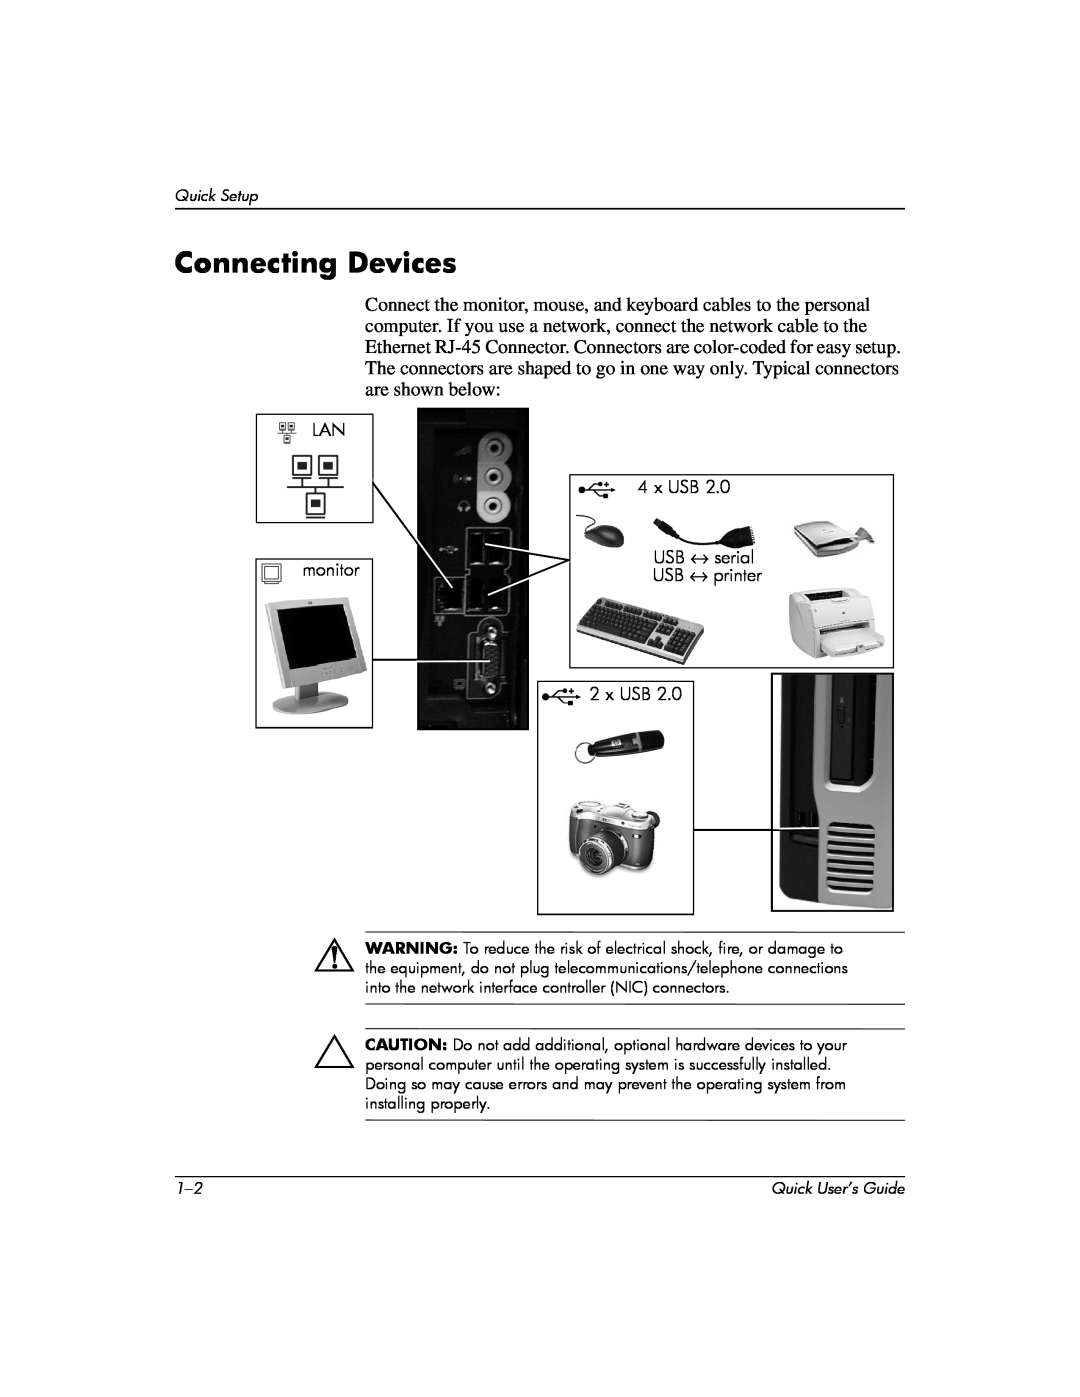 Compaq D510 e-pc manual Connecting Devices, x USB, monitor, USB ↔ serial 